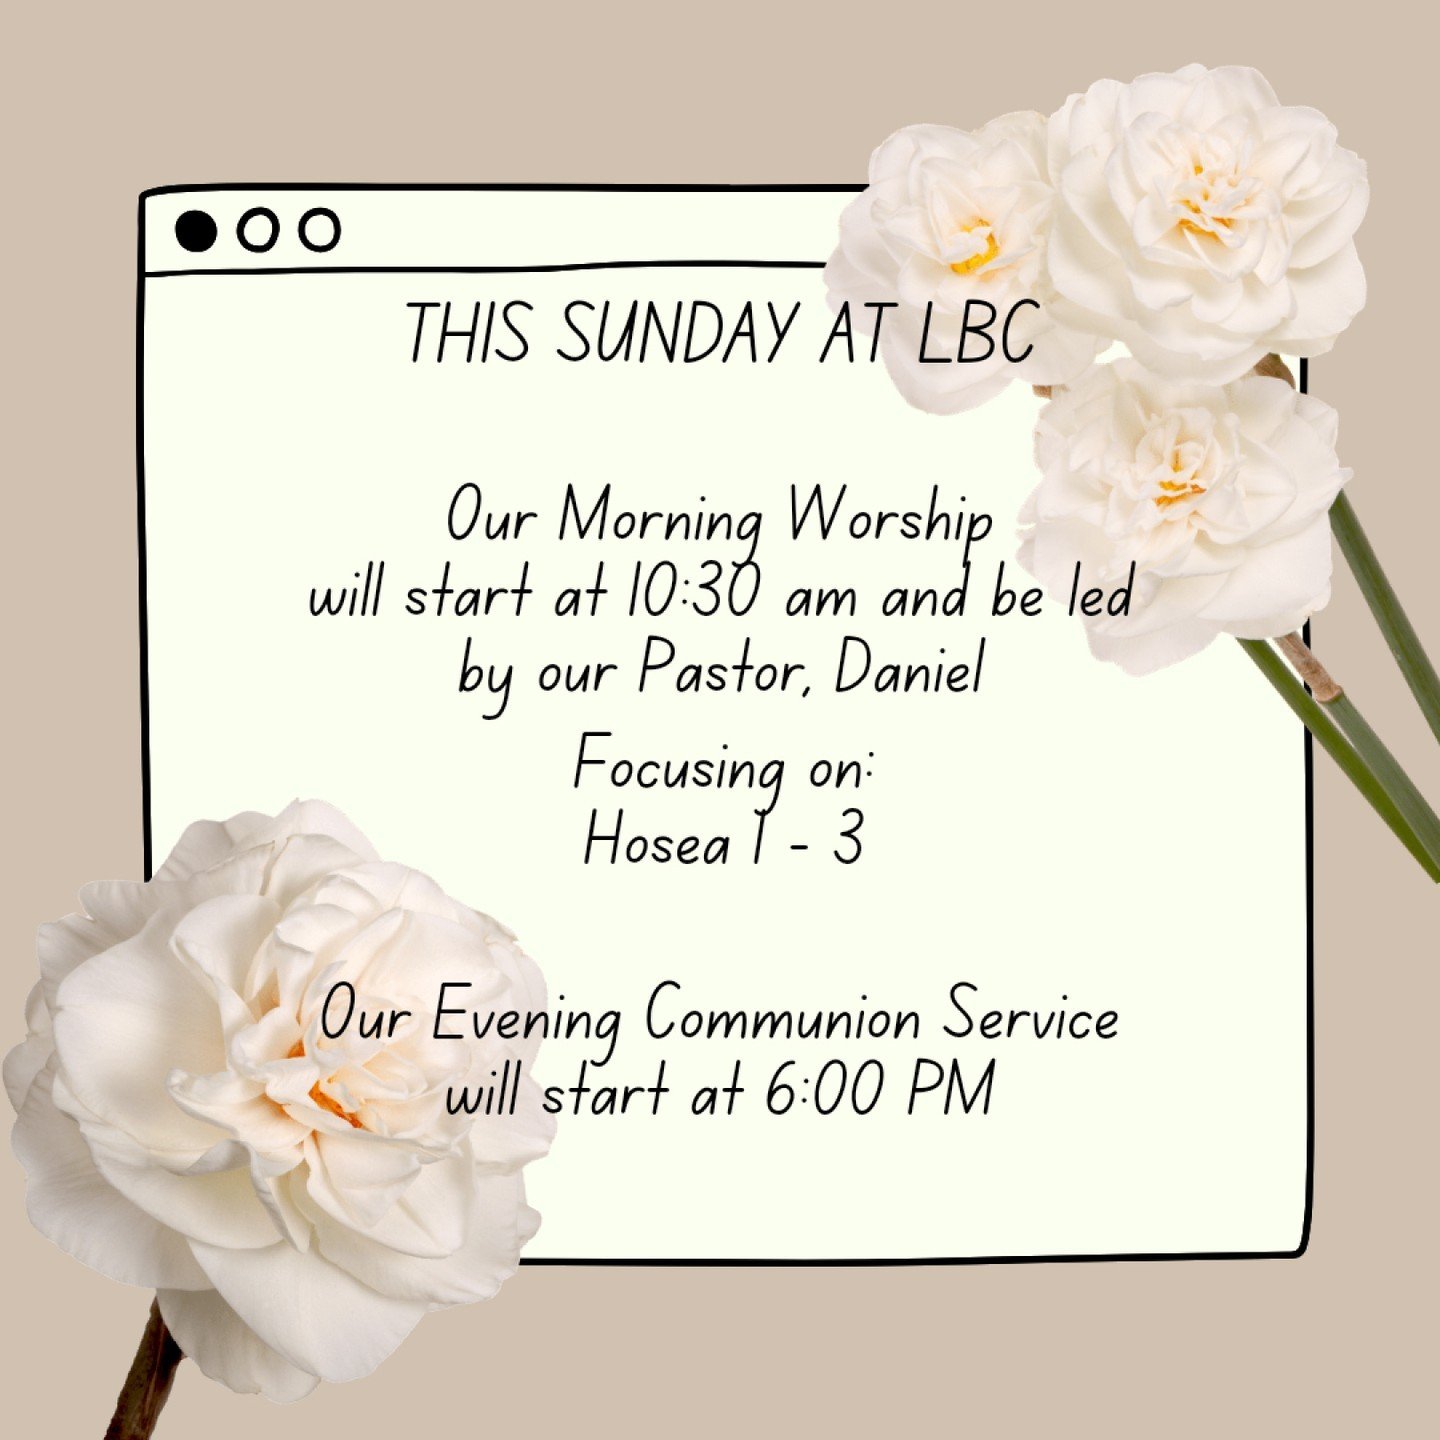 Please join us this Sunday at Lincoln Baptist Church  from 10:00 am for refreshments and fellowship before the service starts at 10:30am where  our Pastor, Daniel will be focusing on Hosea 1-3

And then join us in the evening from 6:00 pm for our eve